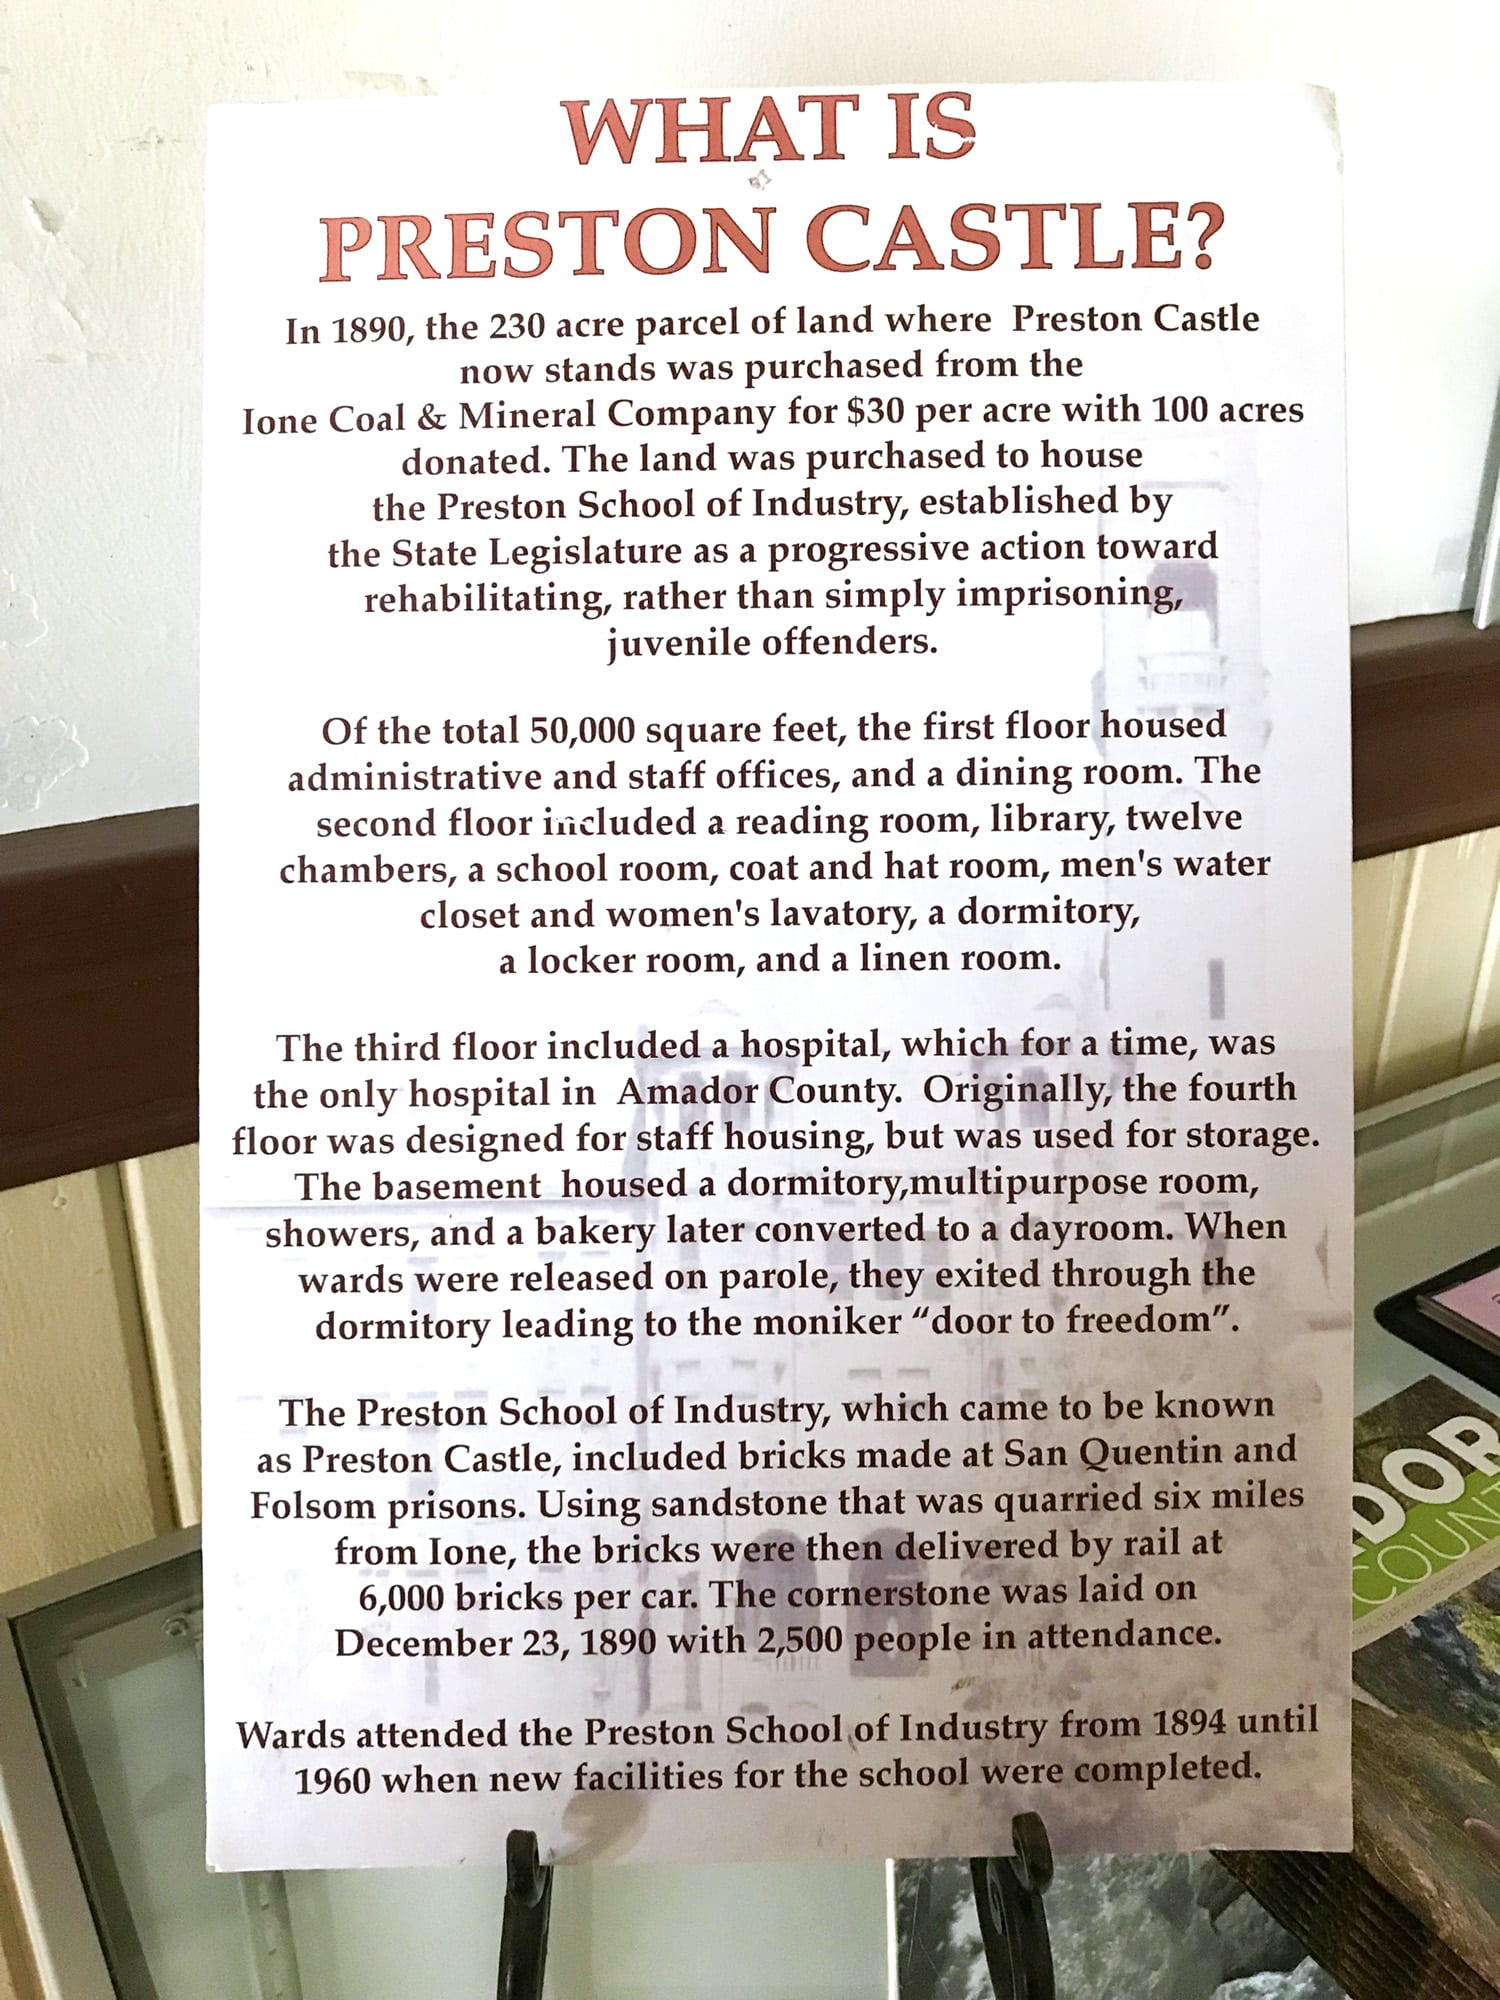 "What is Preston Castle" signage and historical information at the castle